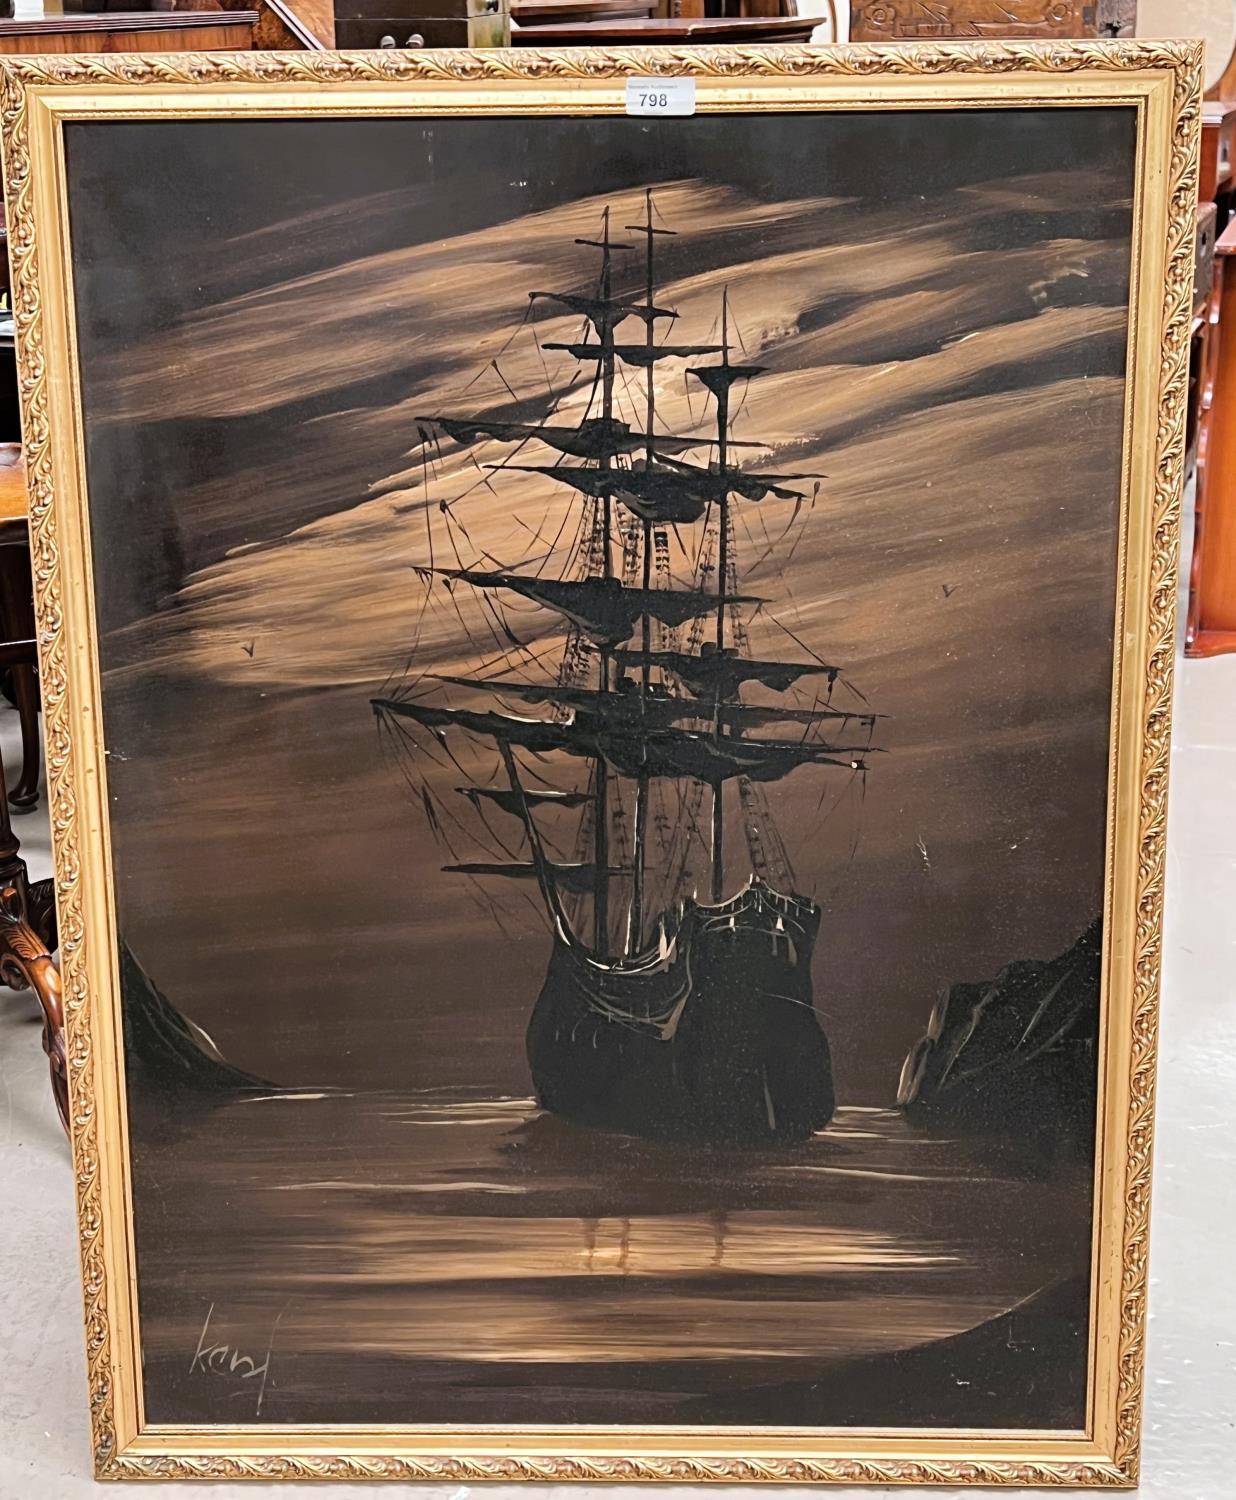 A 20th century three mast sailing ships with sails reefed at night, oil on canvas, signed